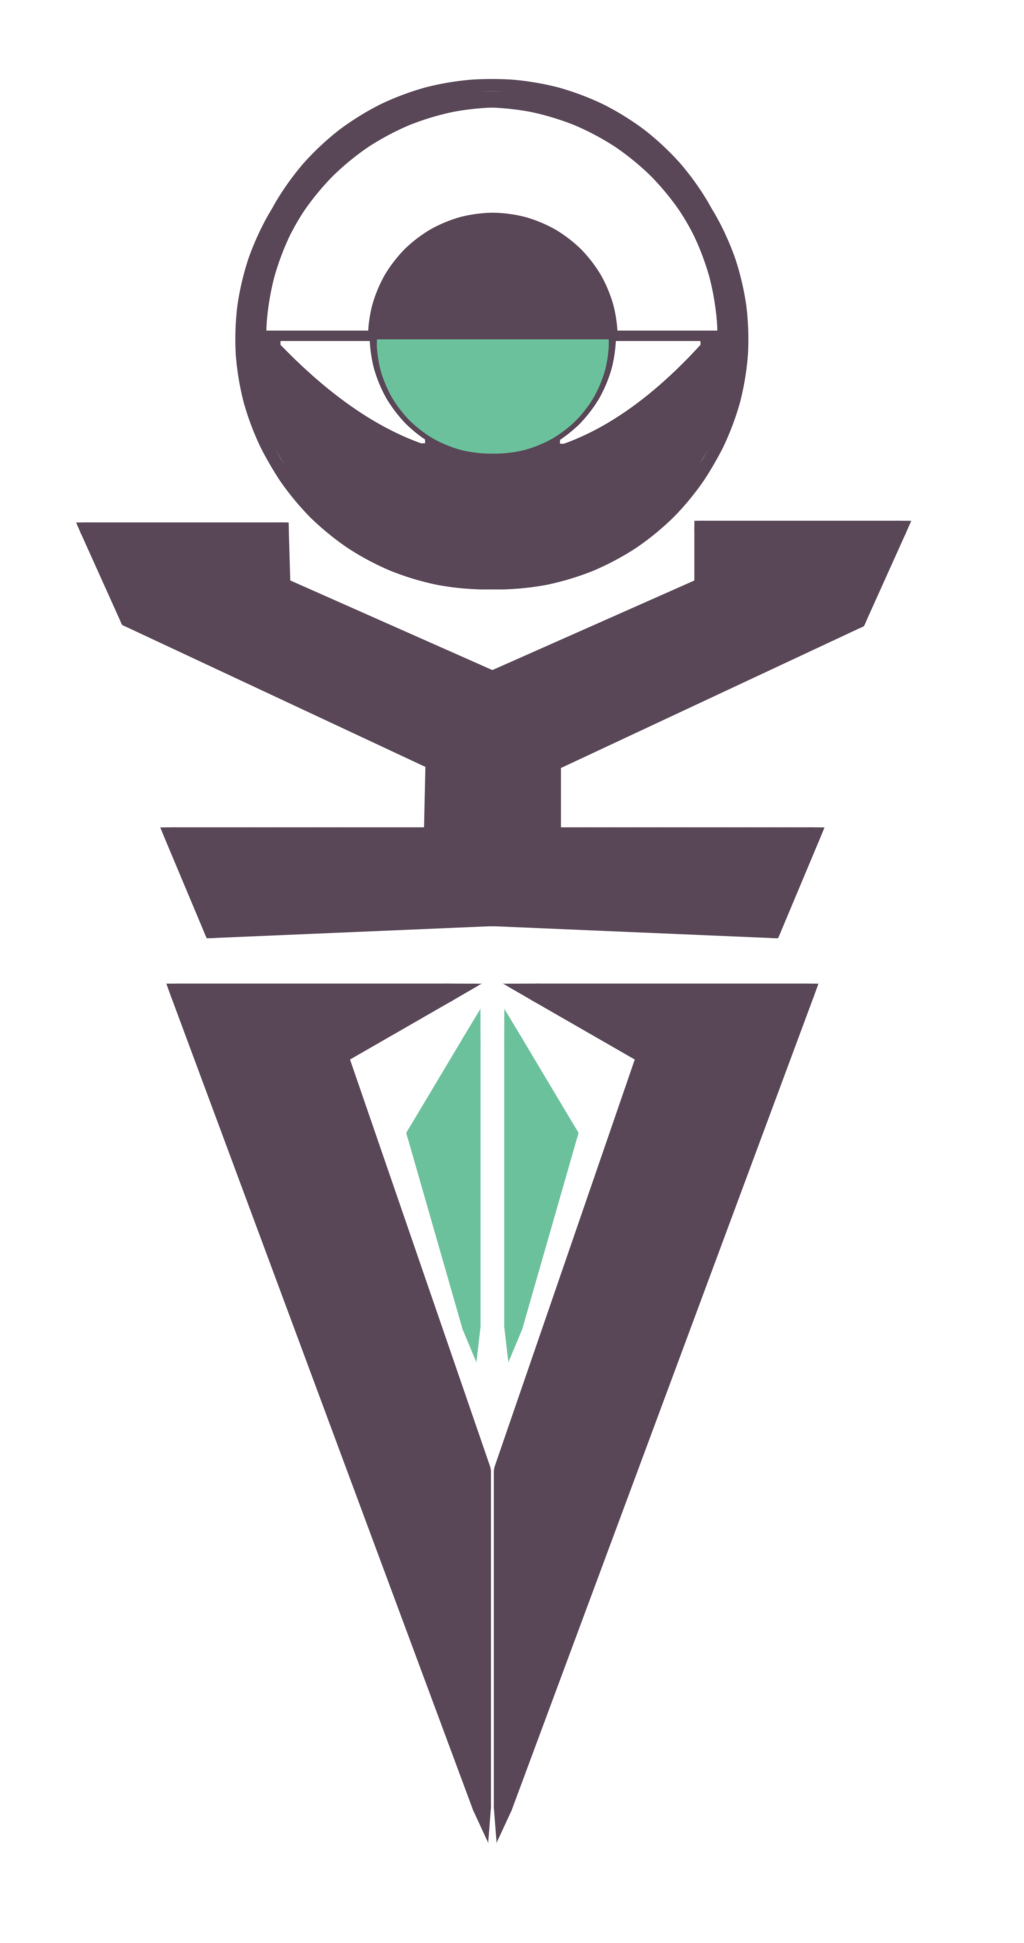 Most recent image: Voyd Family Insignia